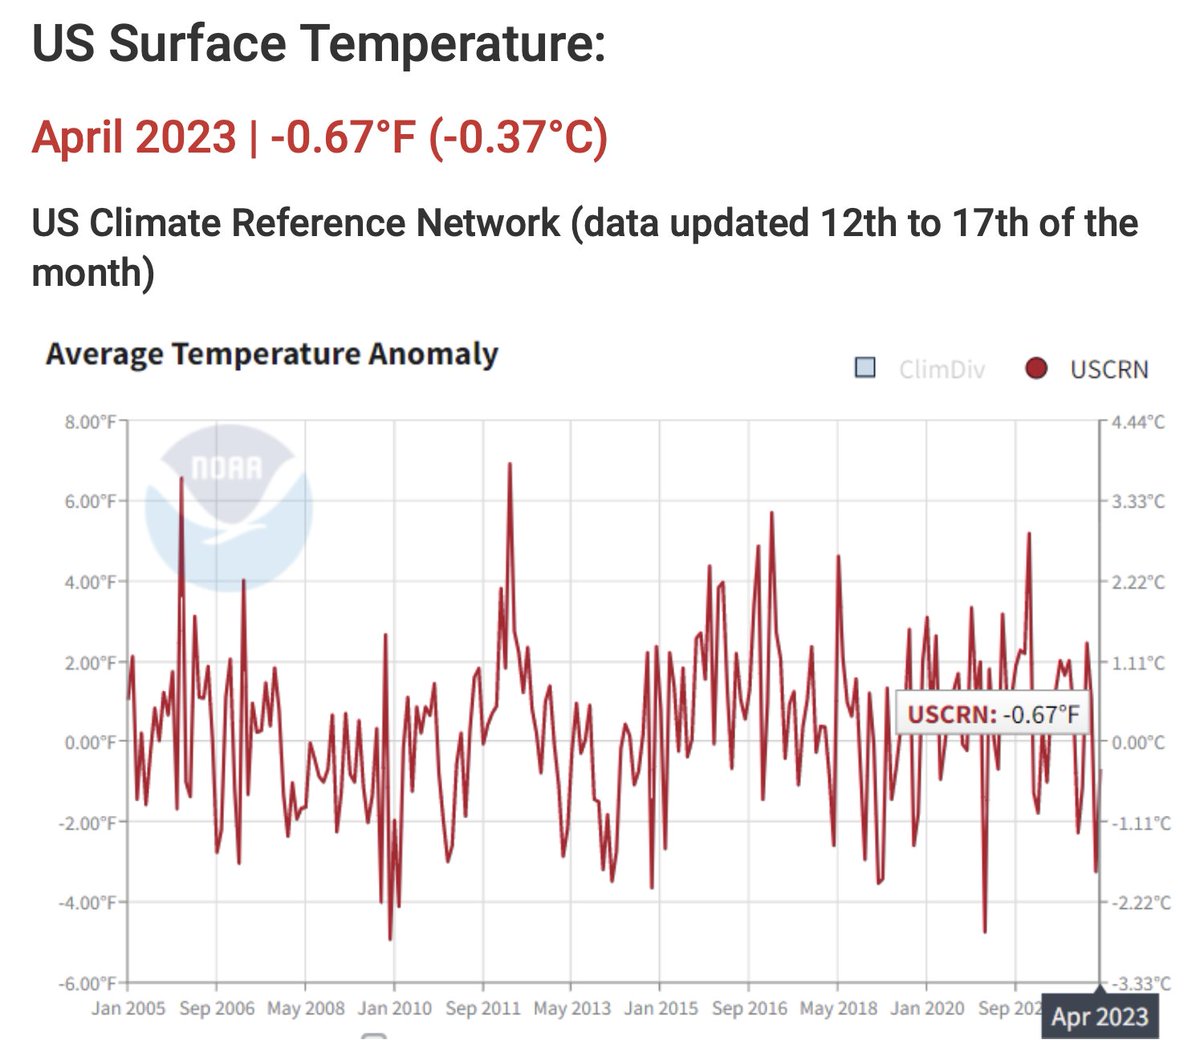 Just in from NOAA: No warming in the US since January 2005, despite 44% more atmospheric CO2. If every emission warms the planet, where's the warming? wattsupwiththat.com/uah-version-6/